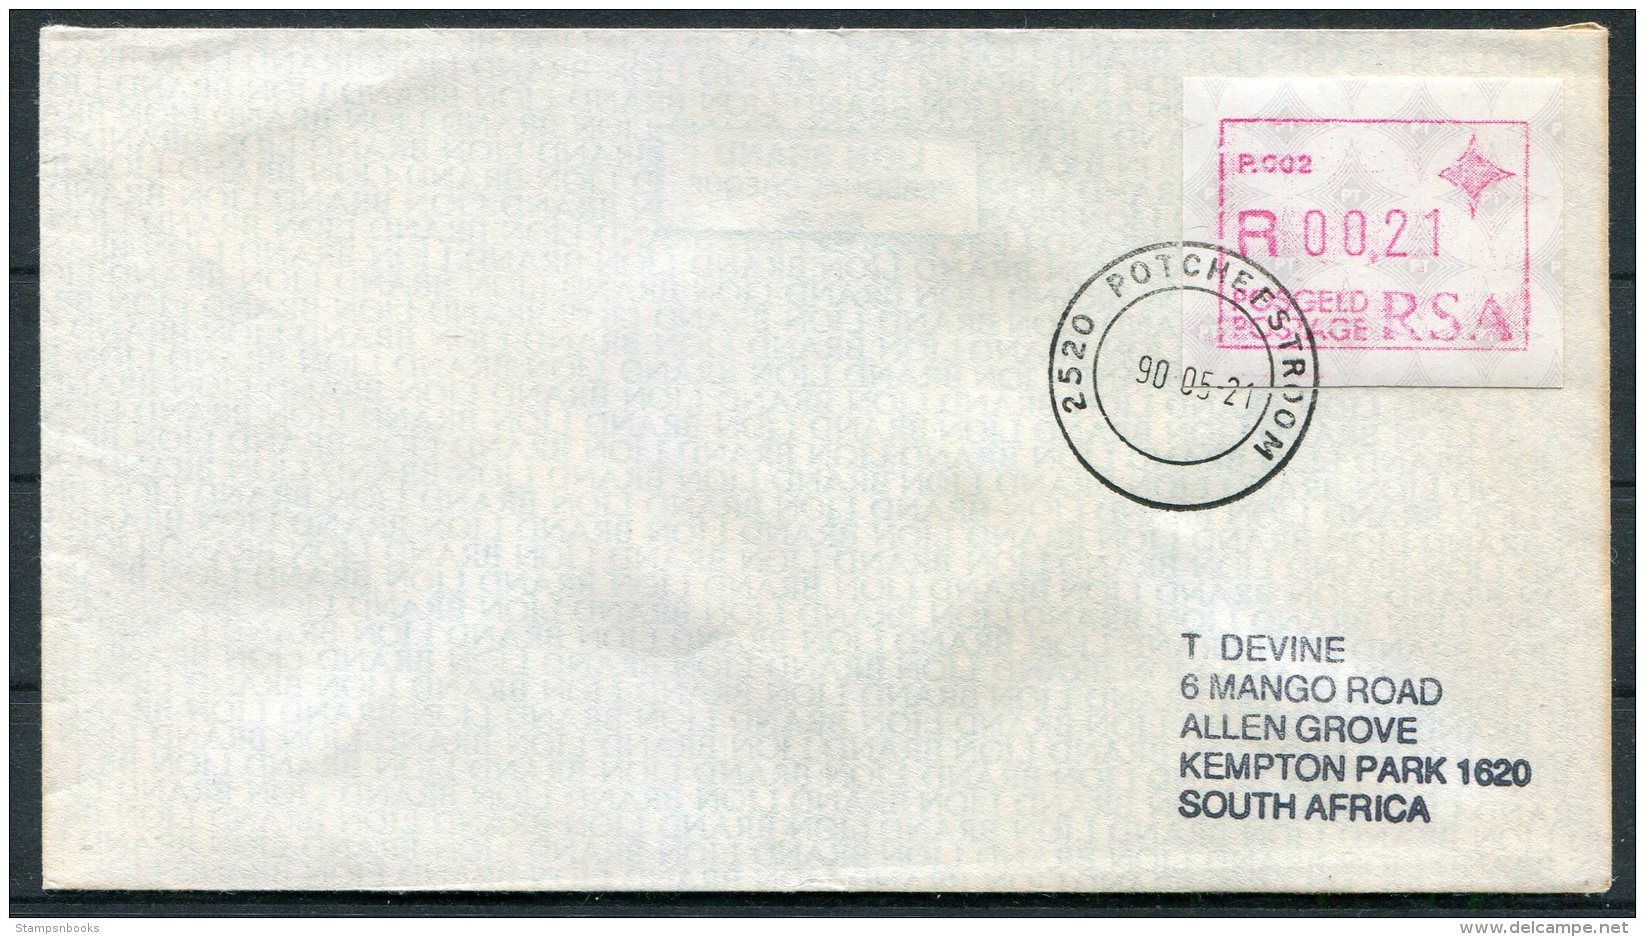 1990 South Africa Frama P002 + P017 Potchefstroom, Auckland Park Covers (2) Mint &amp; Used - Automatenmarken (Frama)